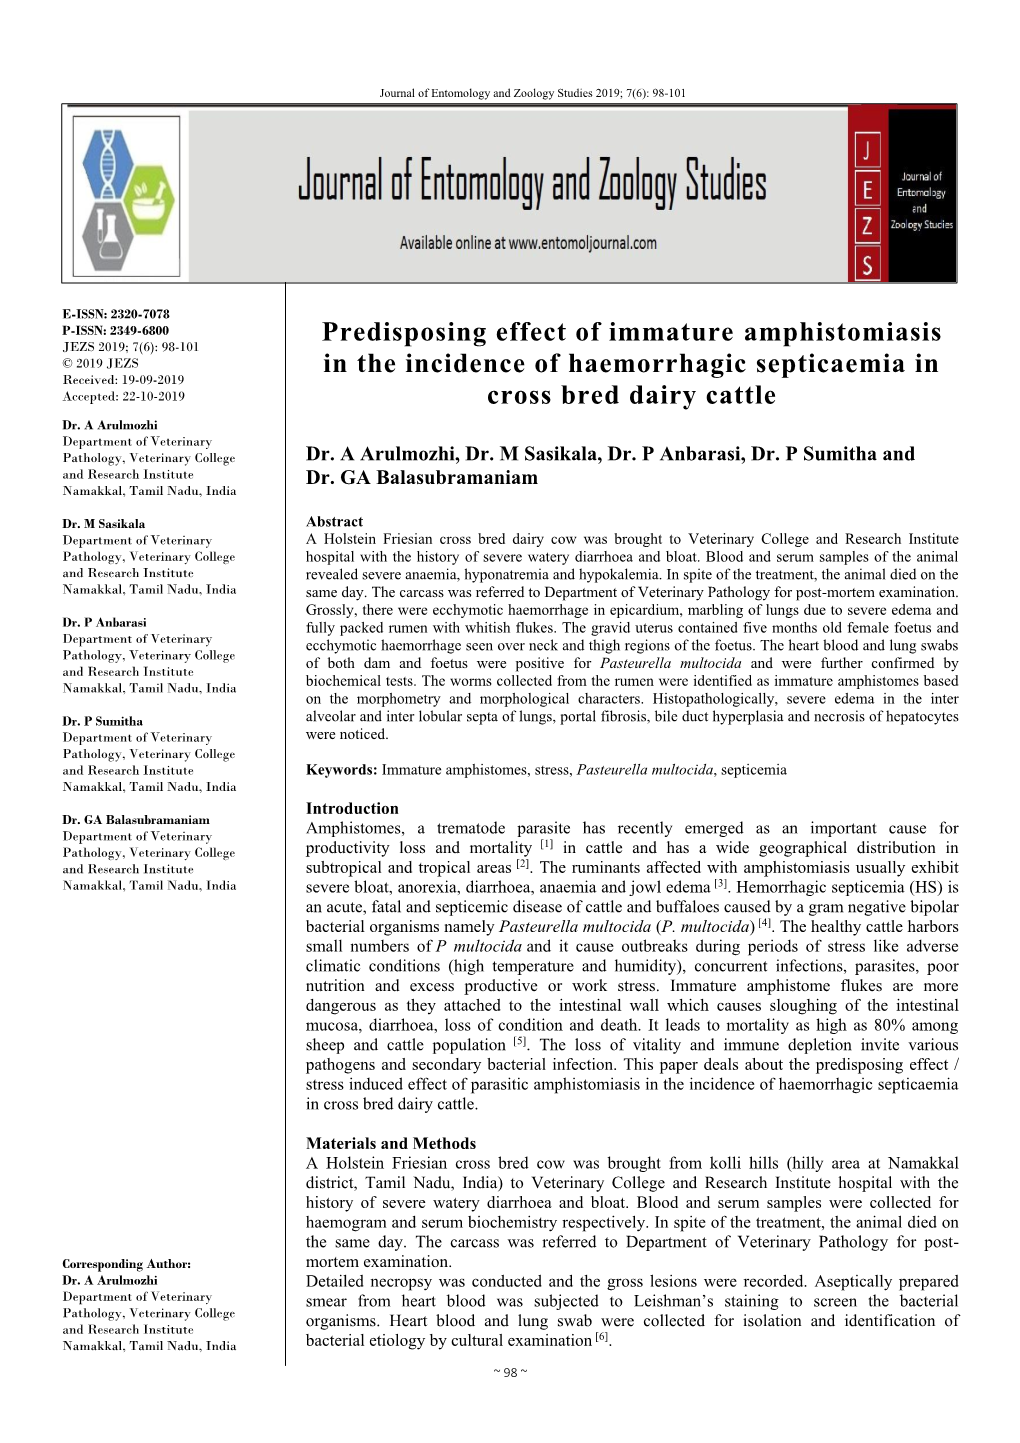 Predisposing Effect of Immature Amphistomiasis in the Incidence Of